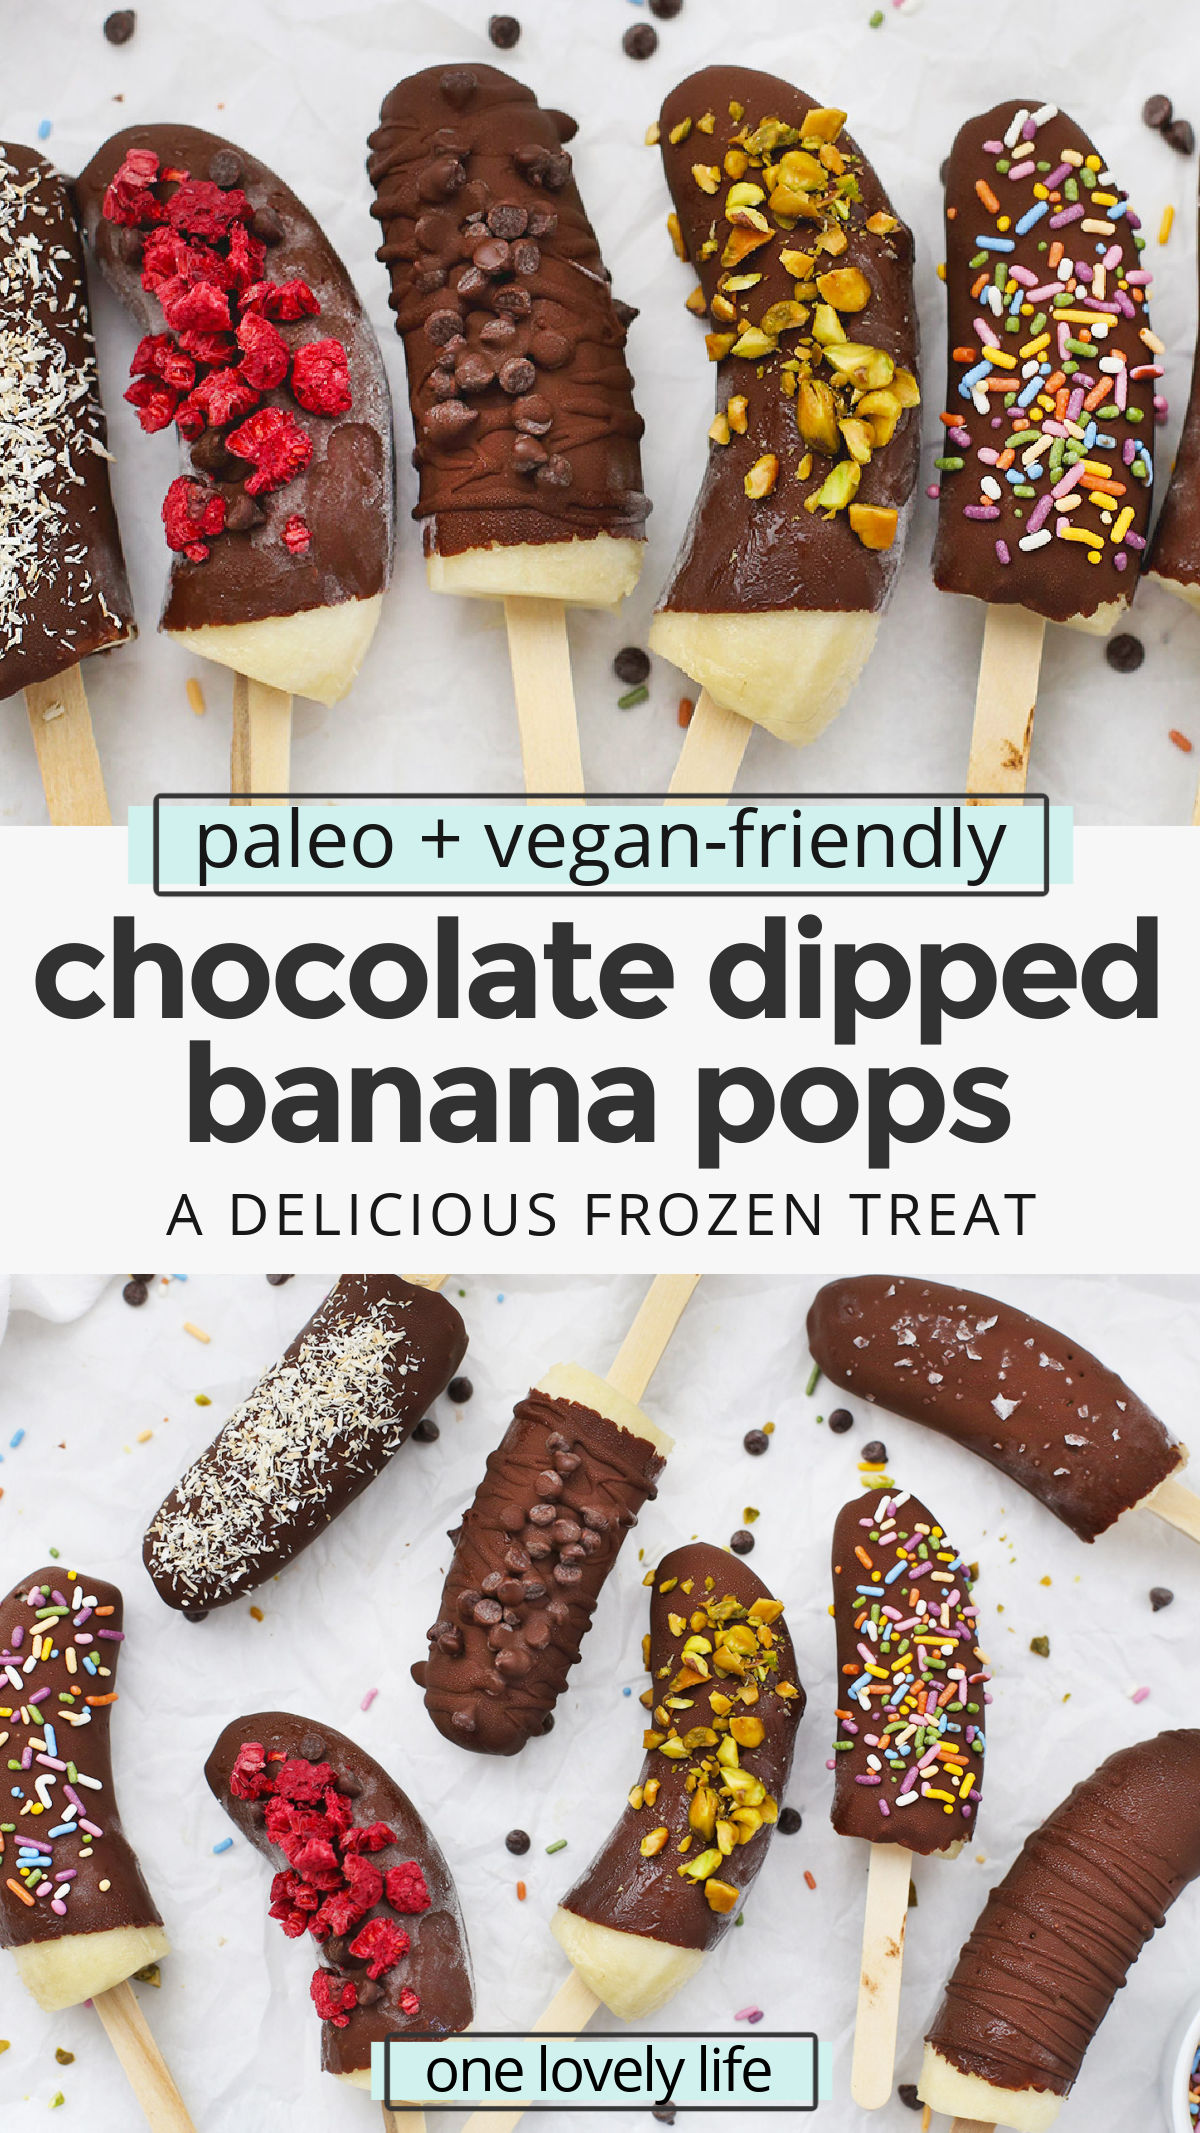 Healthy Chocolate Covered Bananas - These chocolate-dipped bananas are a delicious healthy snack or healthy dessert. Plus, they're gluten-free, vegan & paleo! // Chocolate Covered Banana Pops // Frozen Chocolate Bananas #paleo #healthytreat #healthysnack #vegan #bananas #chocolate